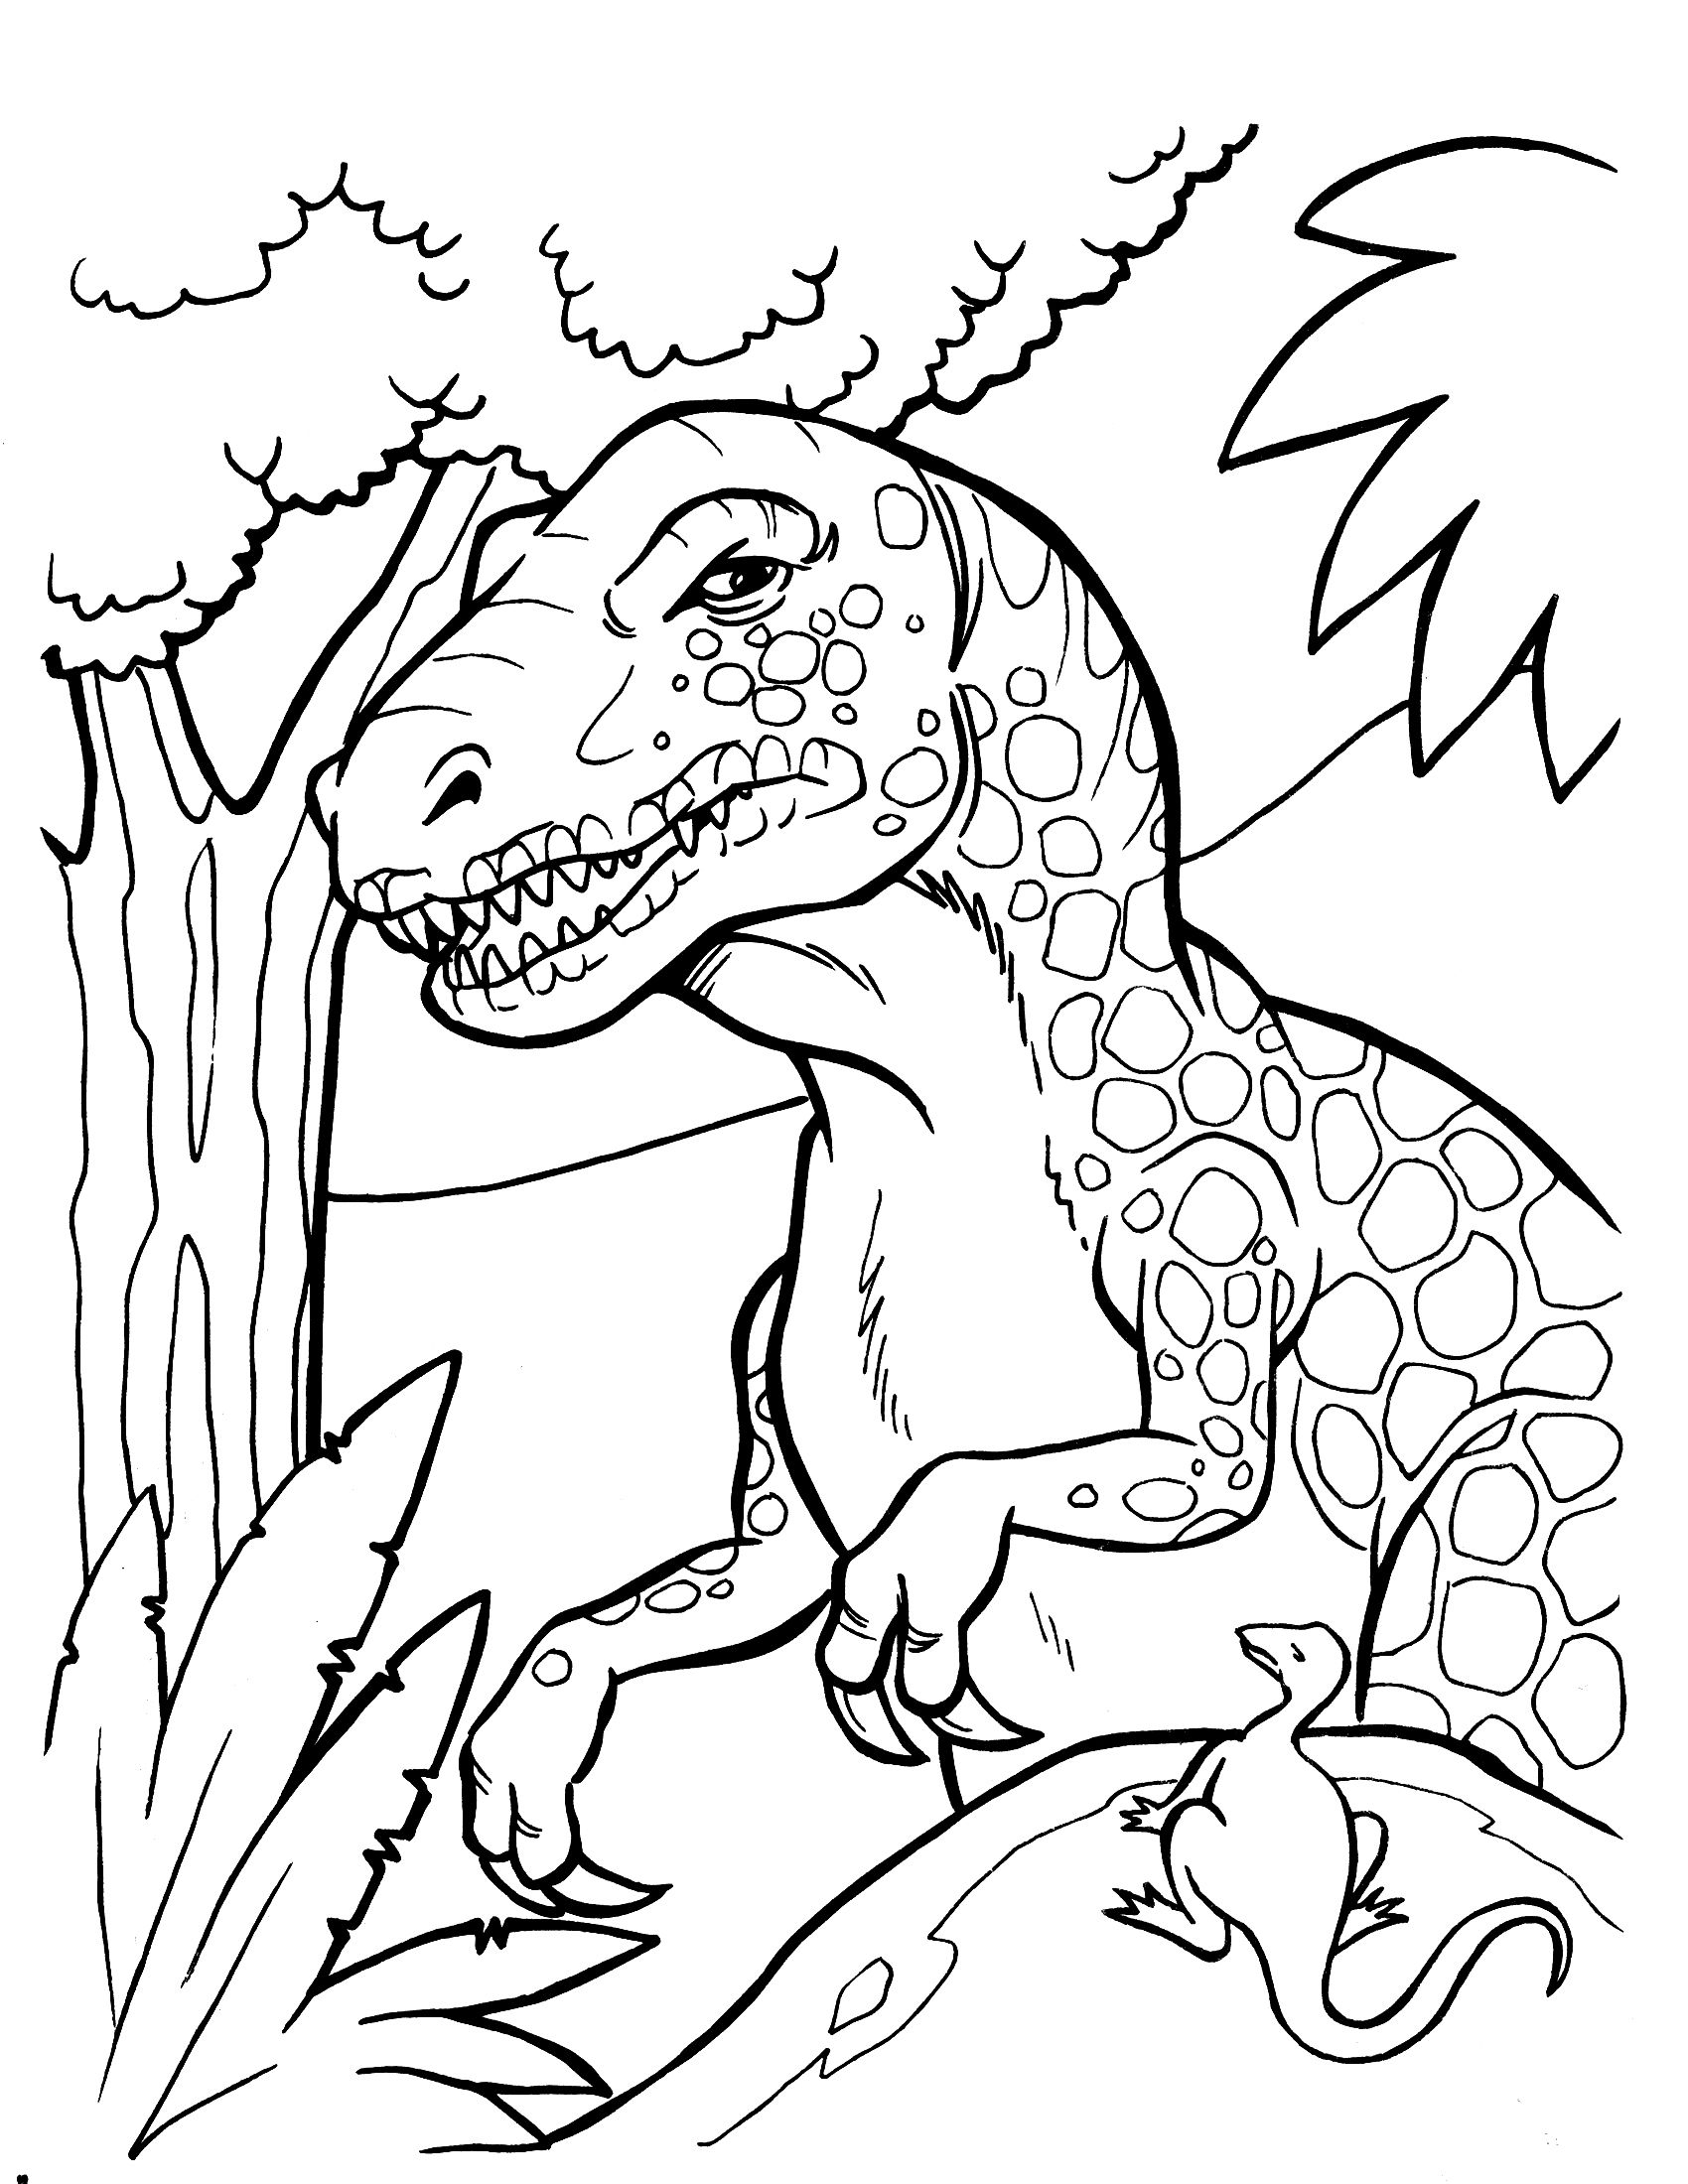 Dinosaur Coloring Pages 360Coloringpages | Adult Coloring - Free Printable Dinosaur Coloring Pages